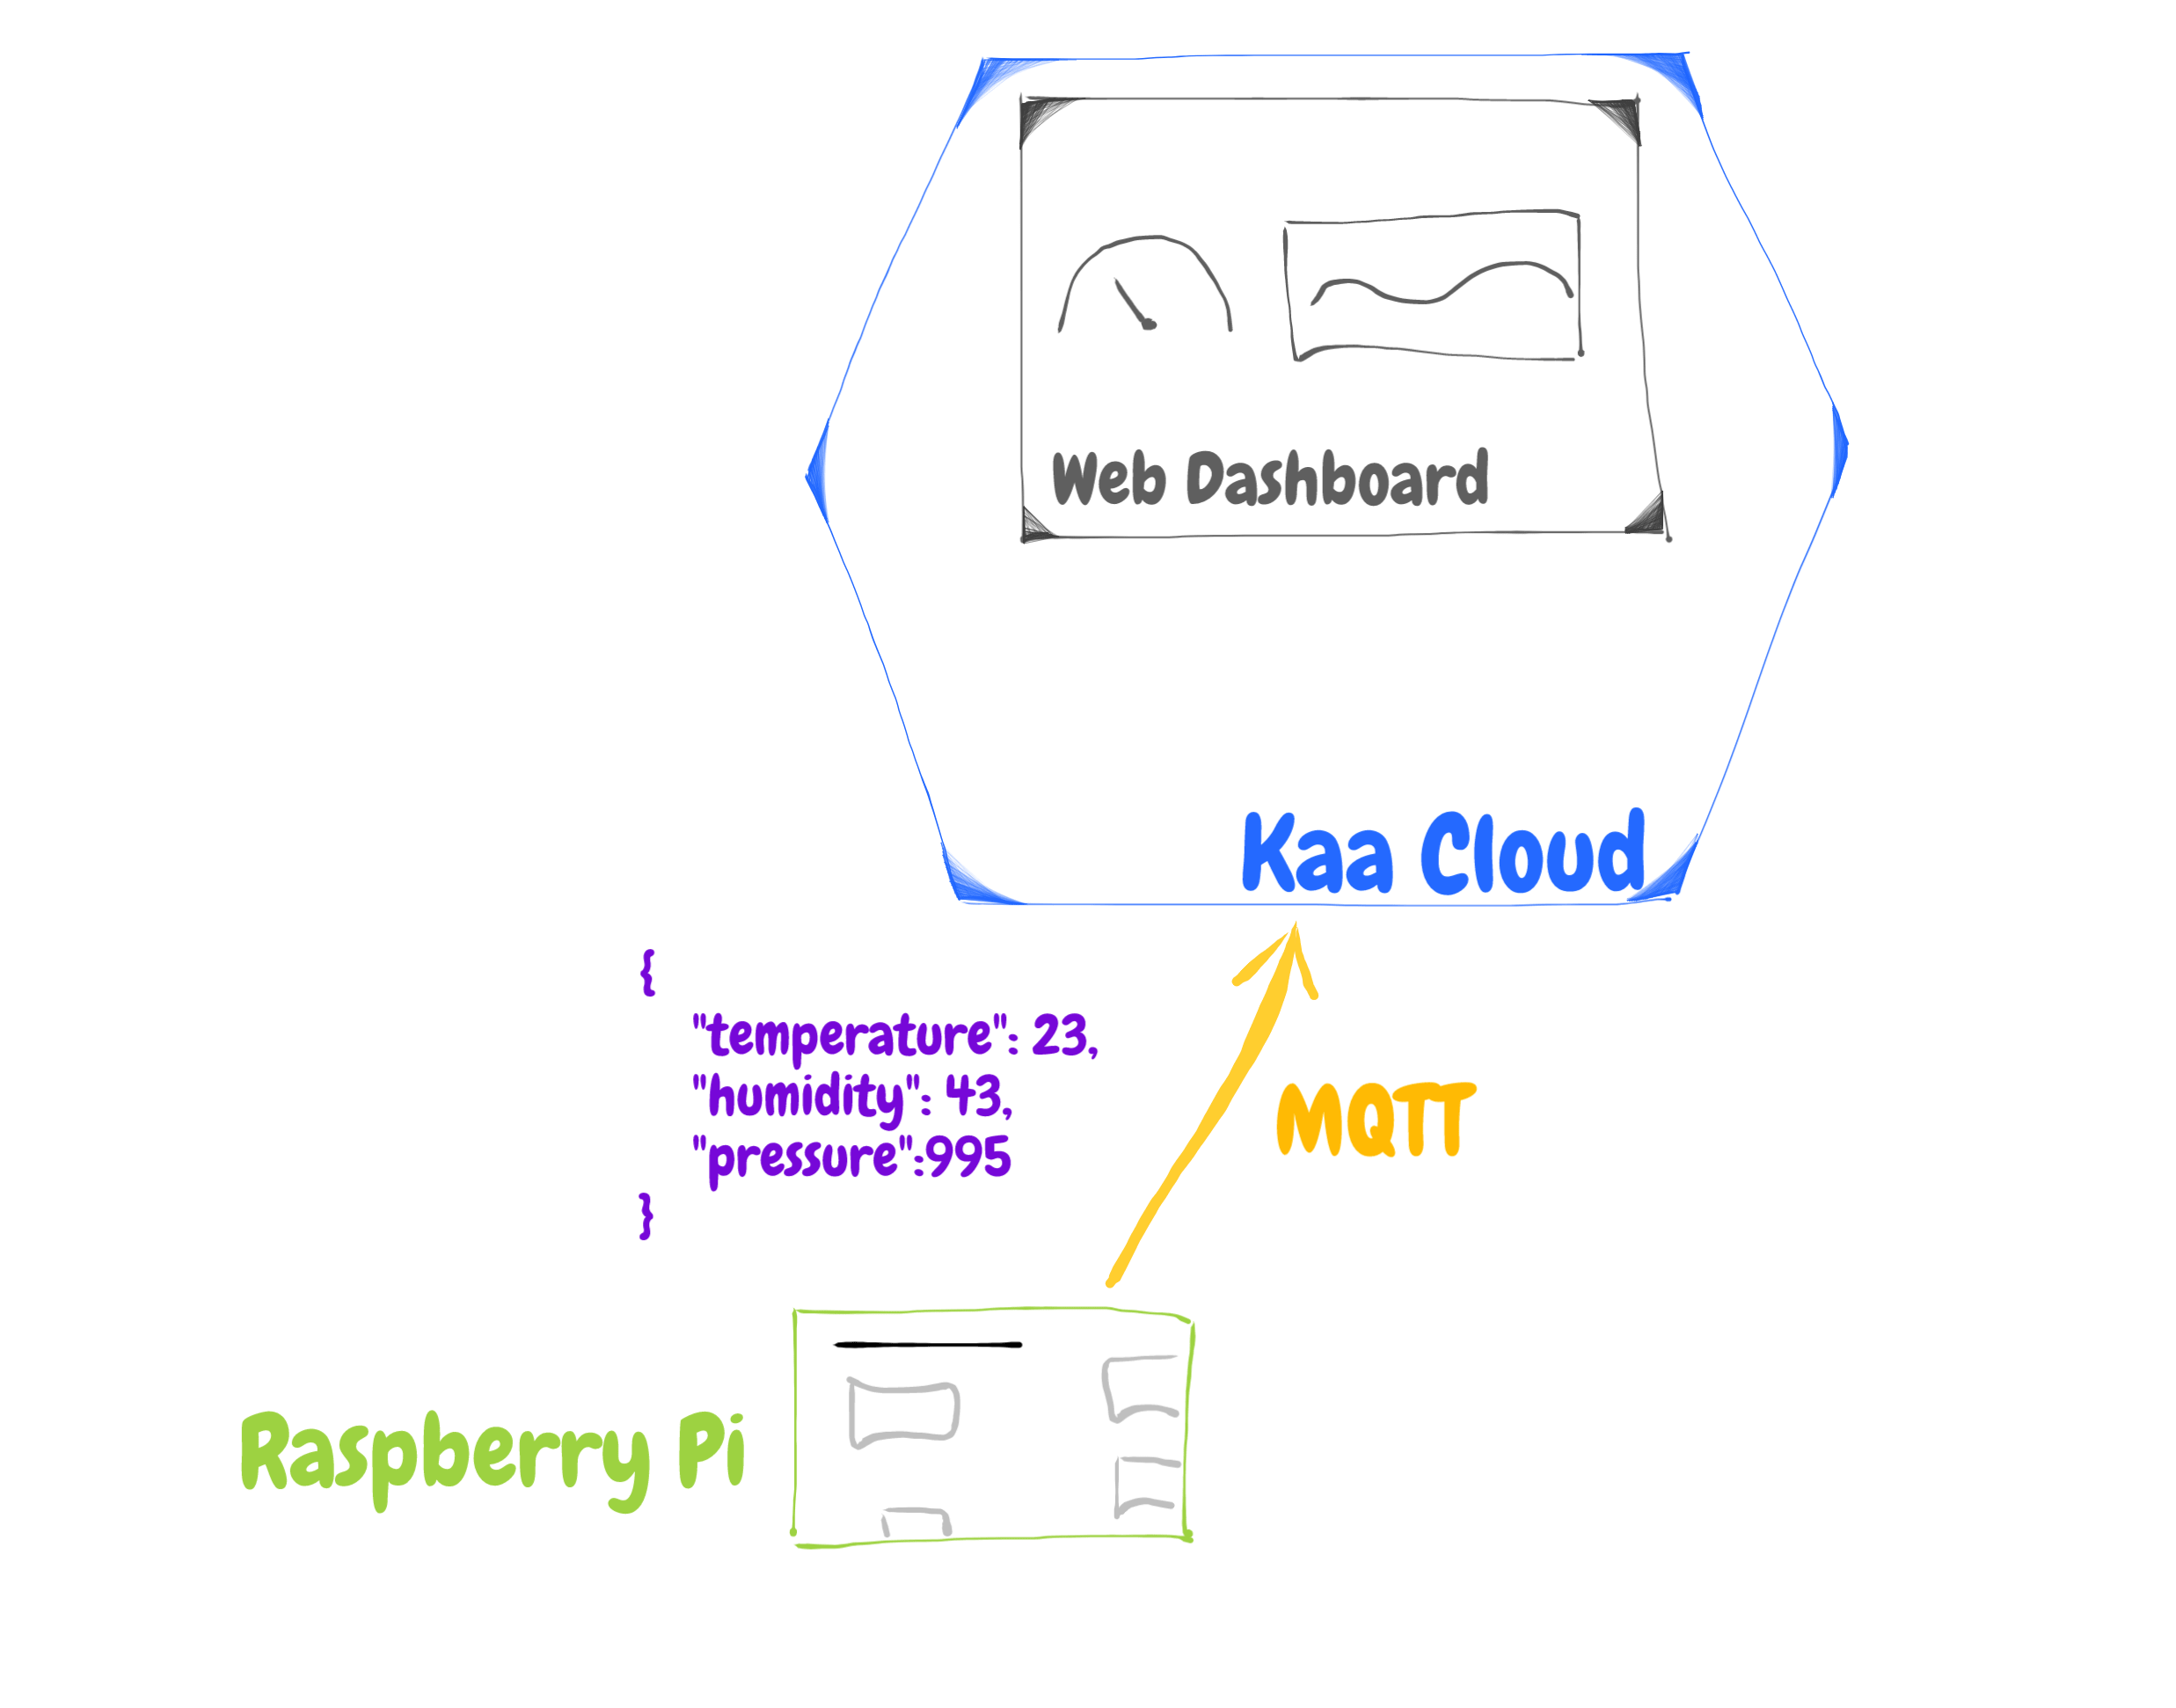 Connect Raspberry Pi to Kaa Cloud use case